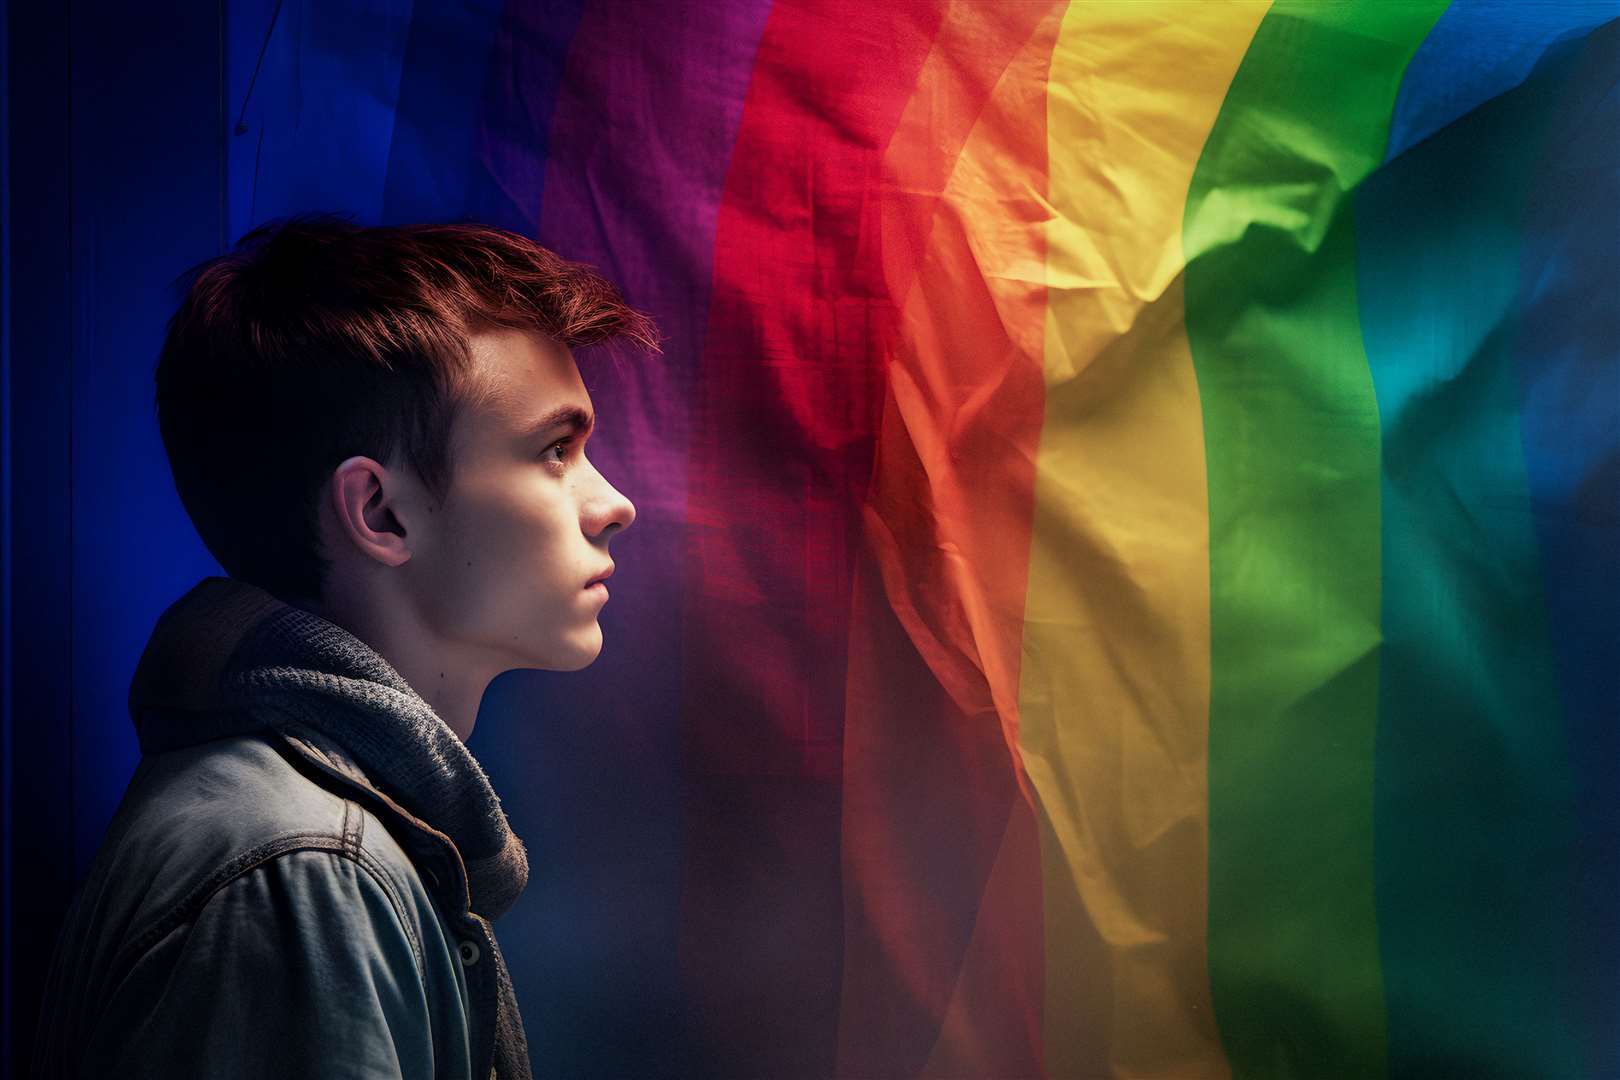 Data shows that LGBTQ+ young people in rural areas feel their communities are less welcoming than their non-rural counterparts. Picture: Callum Mackay (generated by AI)